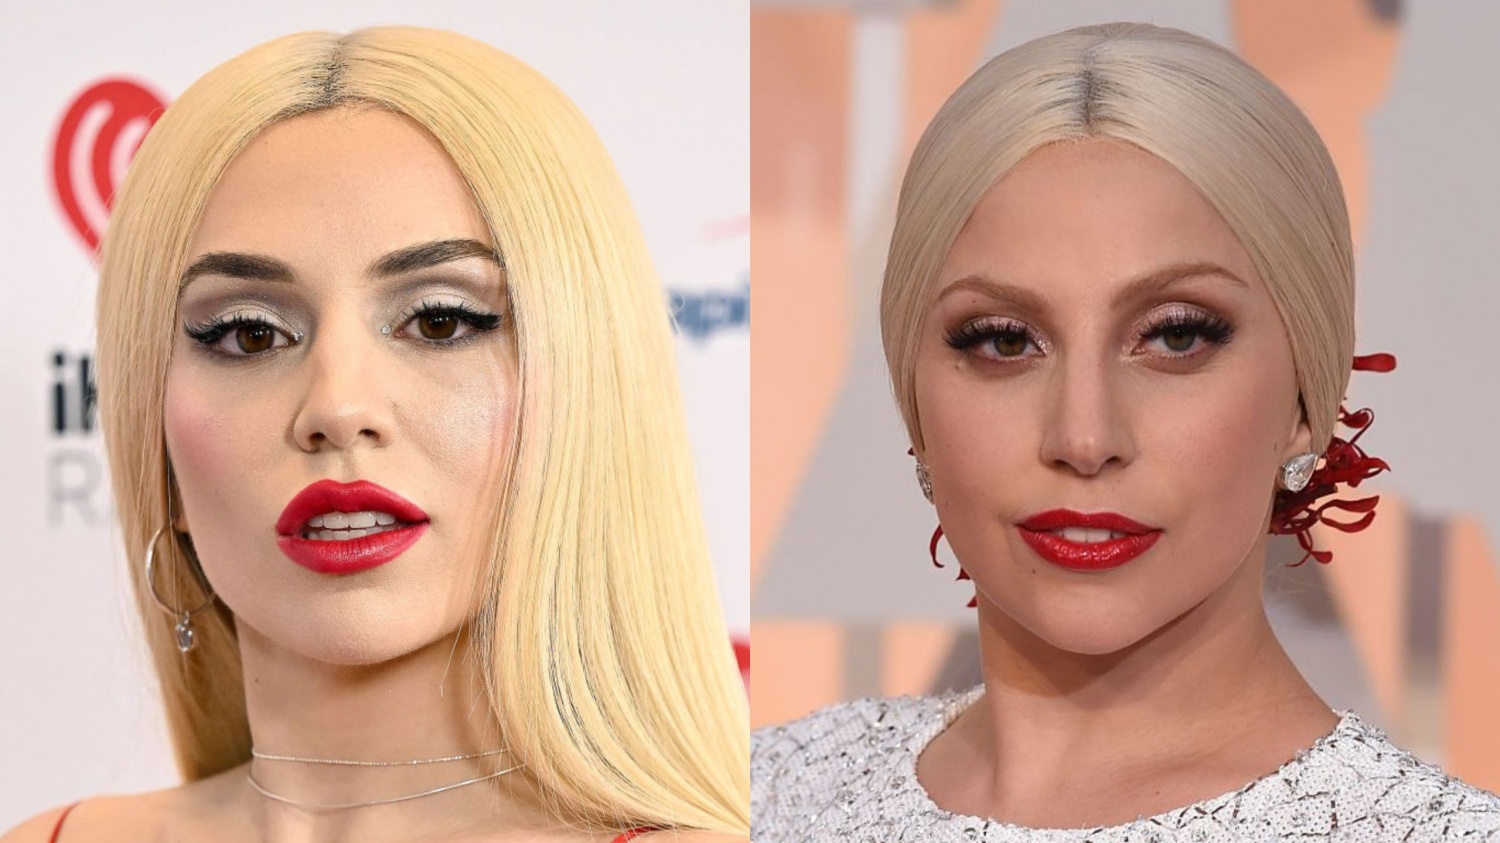 Ava Max Reacts to Lady Gaga Comparisons Amid New Album’s Release